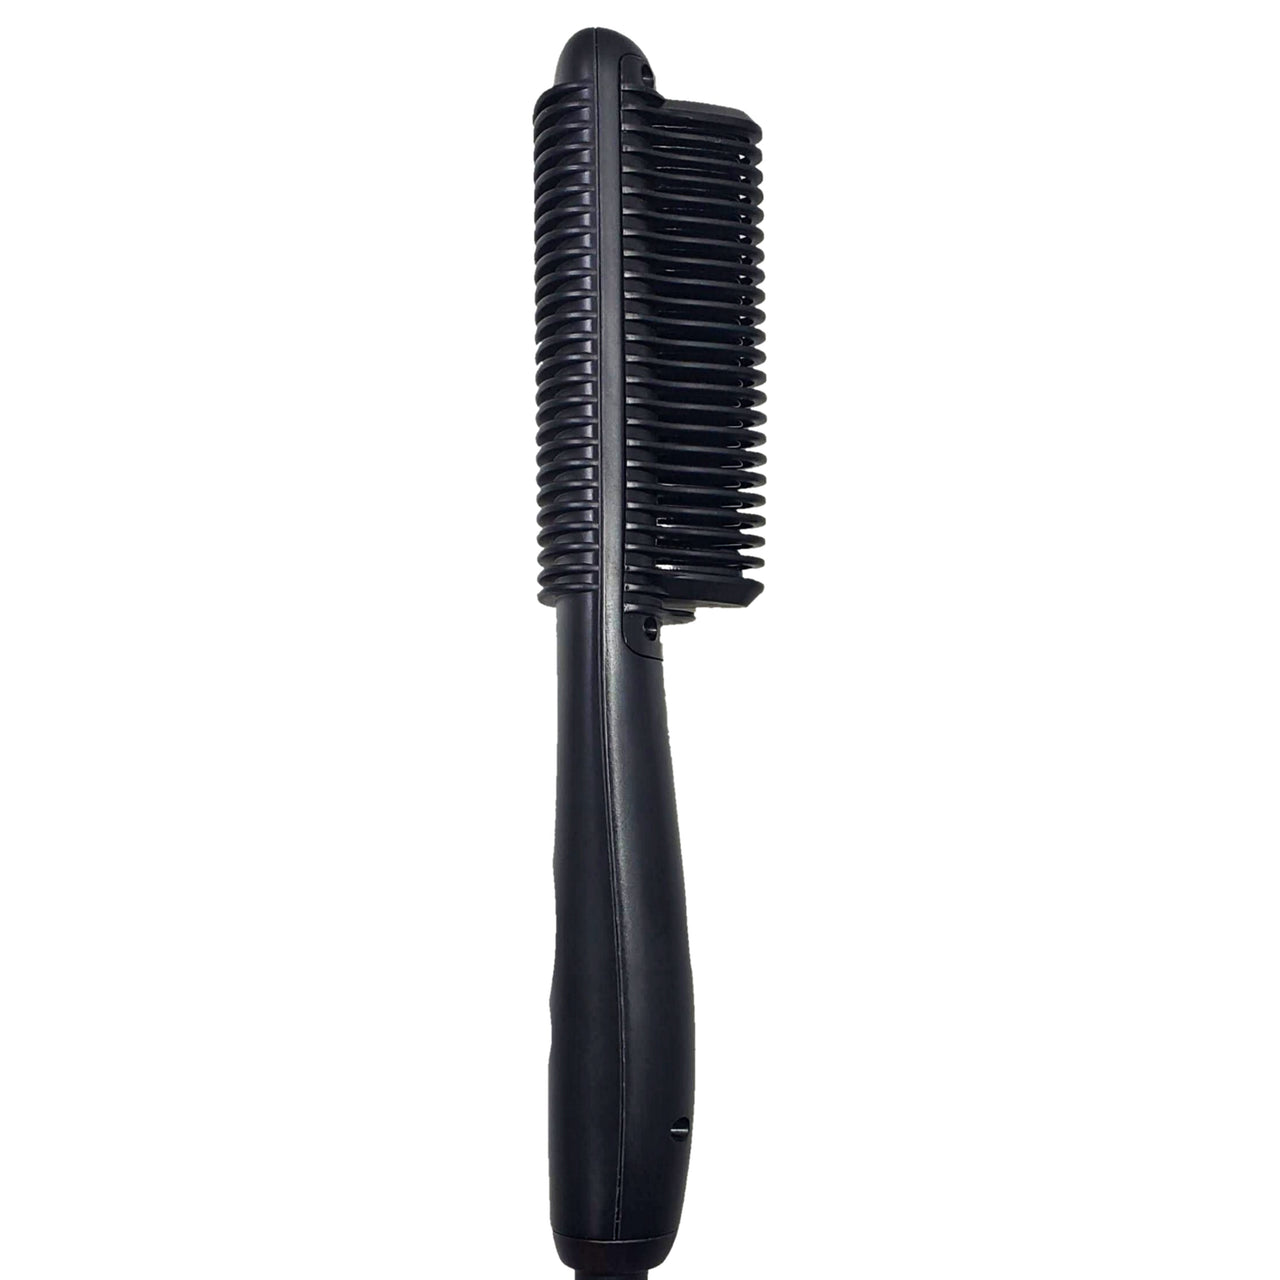 23 Ionic Ceramic Comb Plates Heated Brush Volumizes and Straightens Hair with Adjustable Temperature